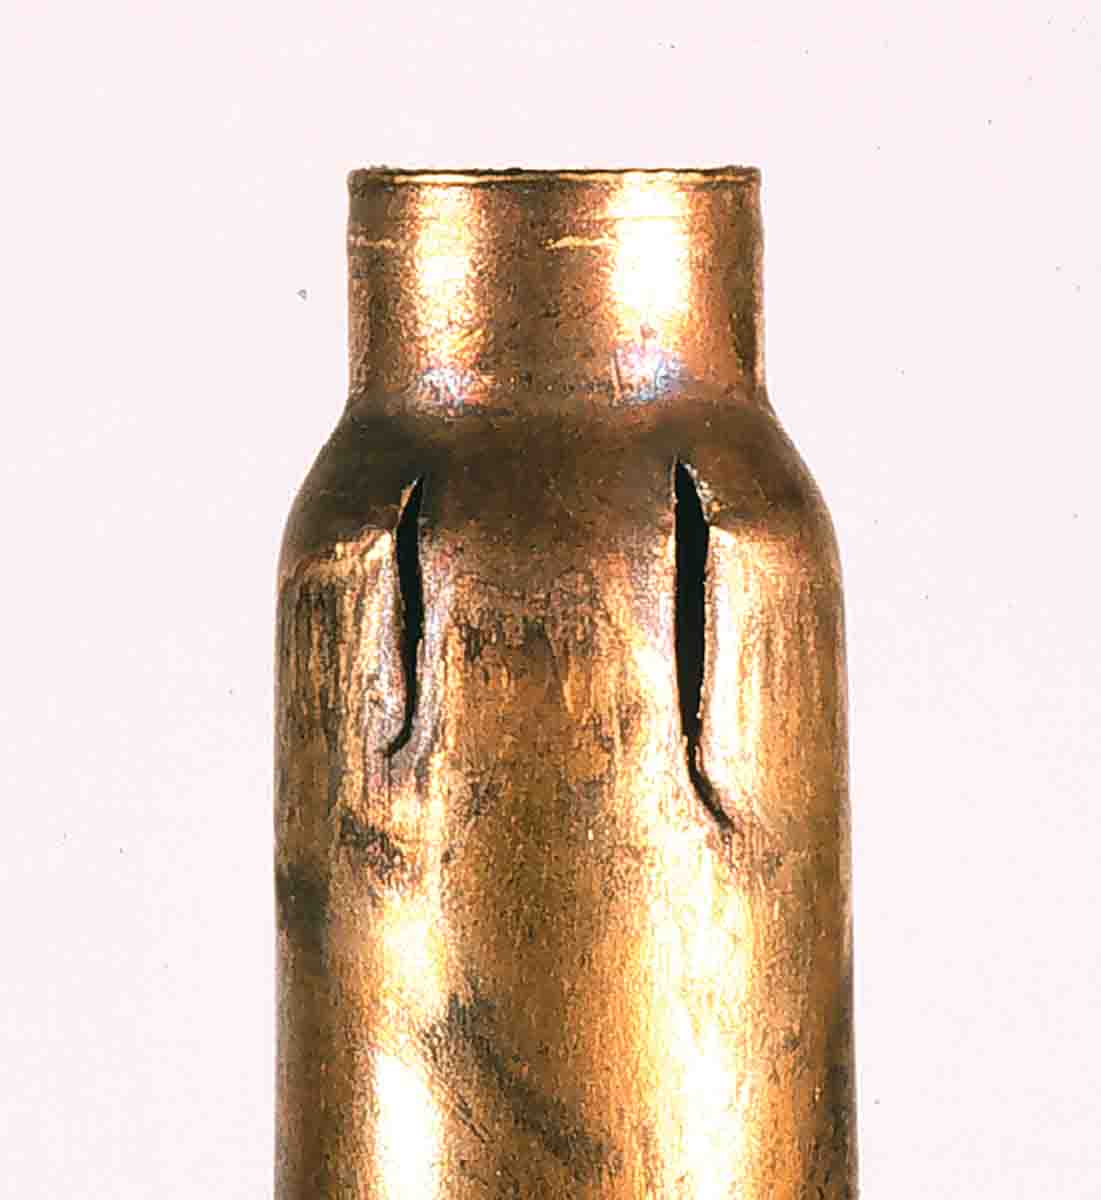 A close look reveals twin shoulder splits on this fireformed Winchester case.